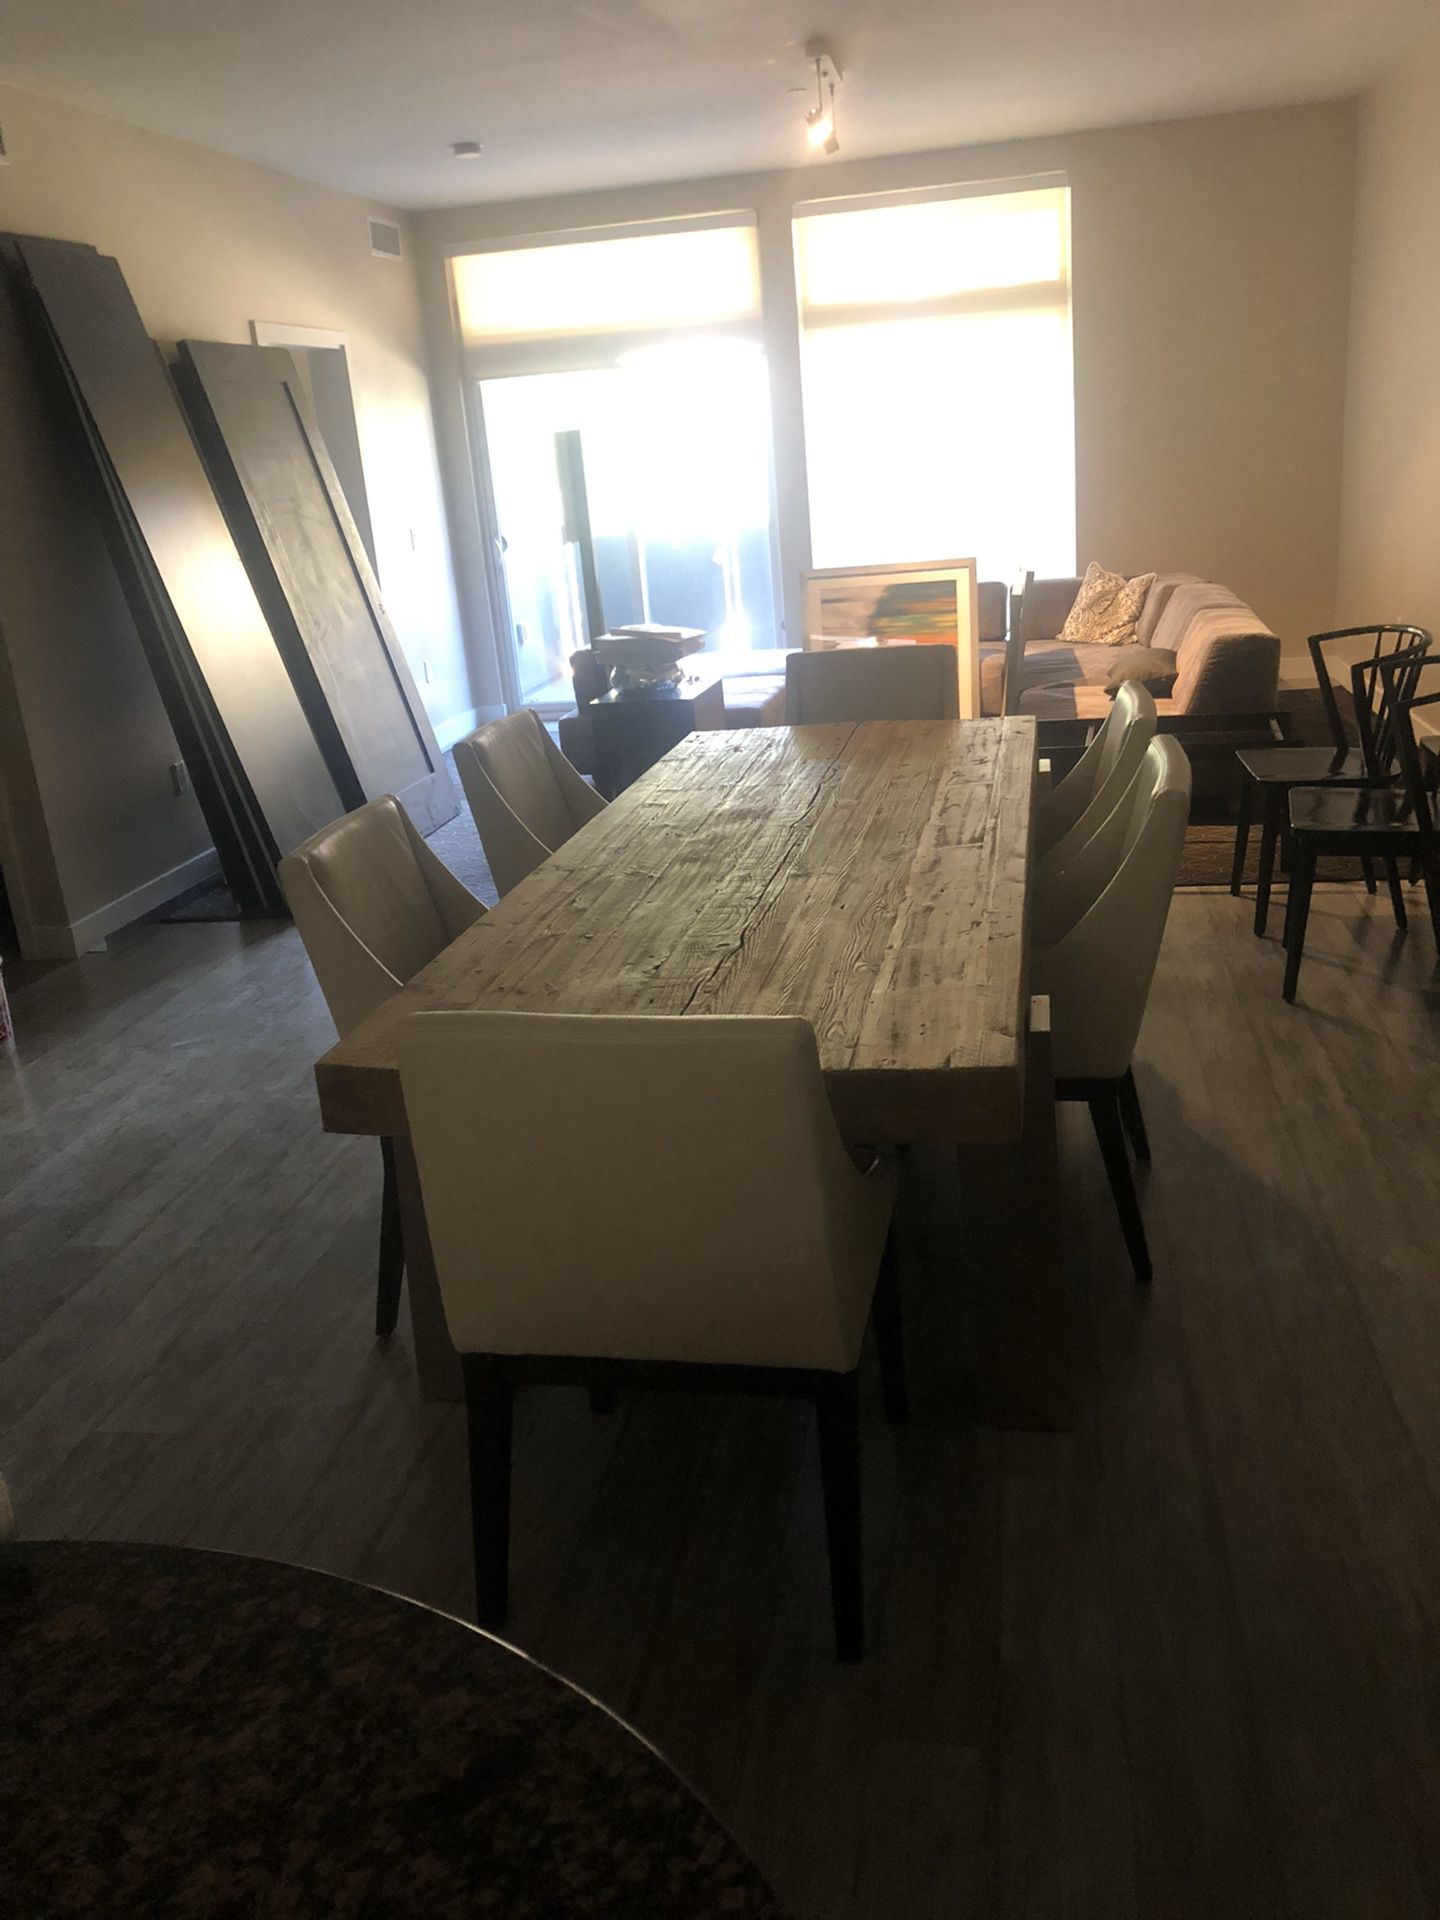 Big wood table with 6 chairs $300 obo